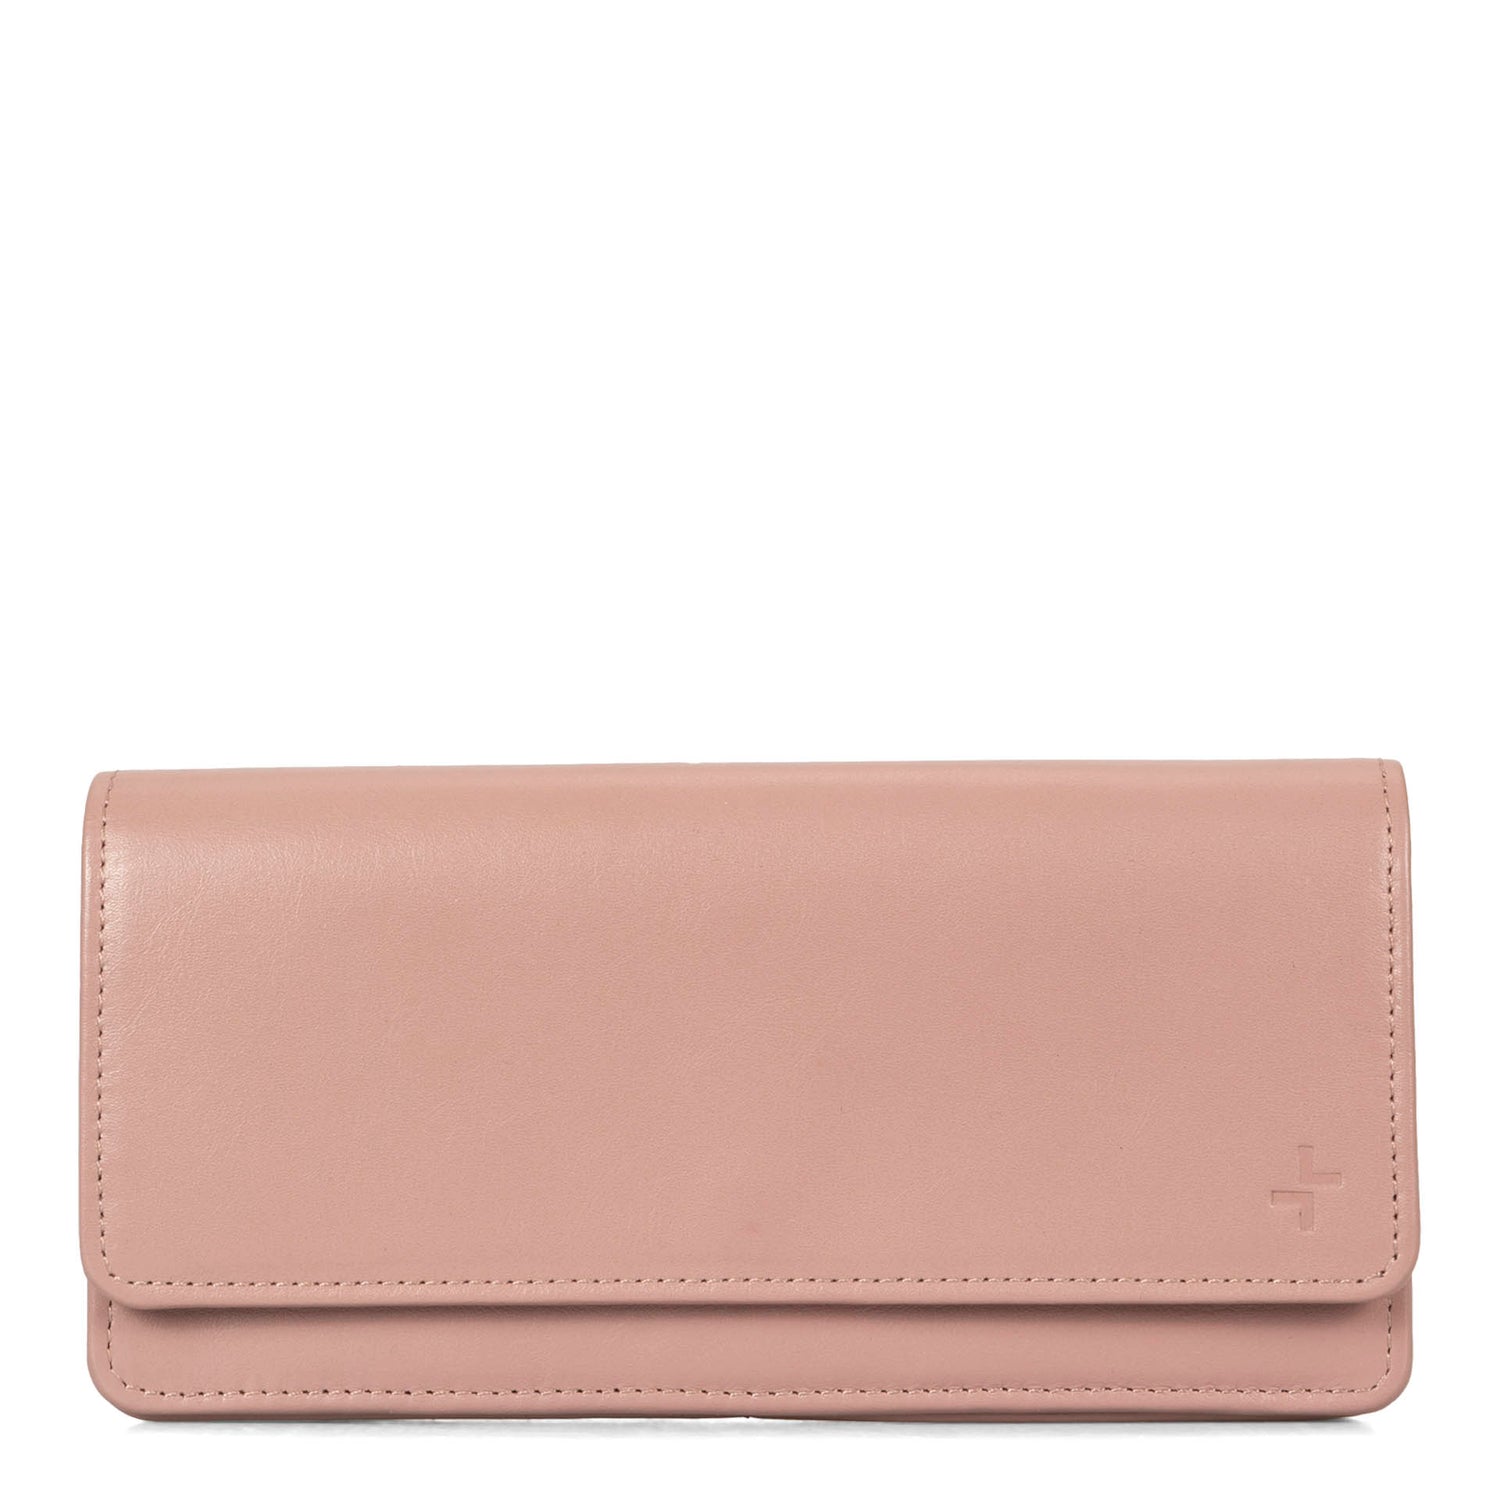 Front side of a pink women's wallet called Kelly designed by Tracker showing its leather texture and stitchings.